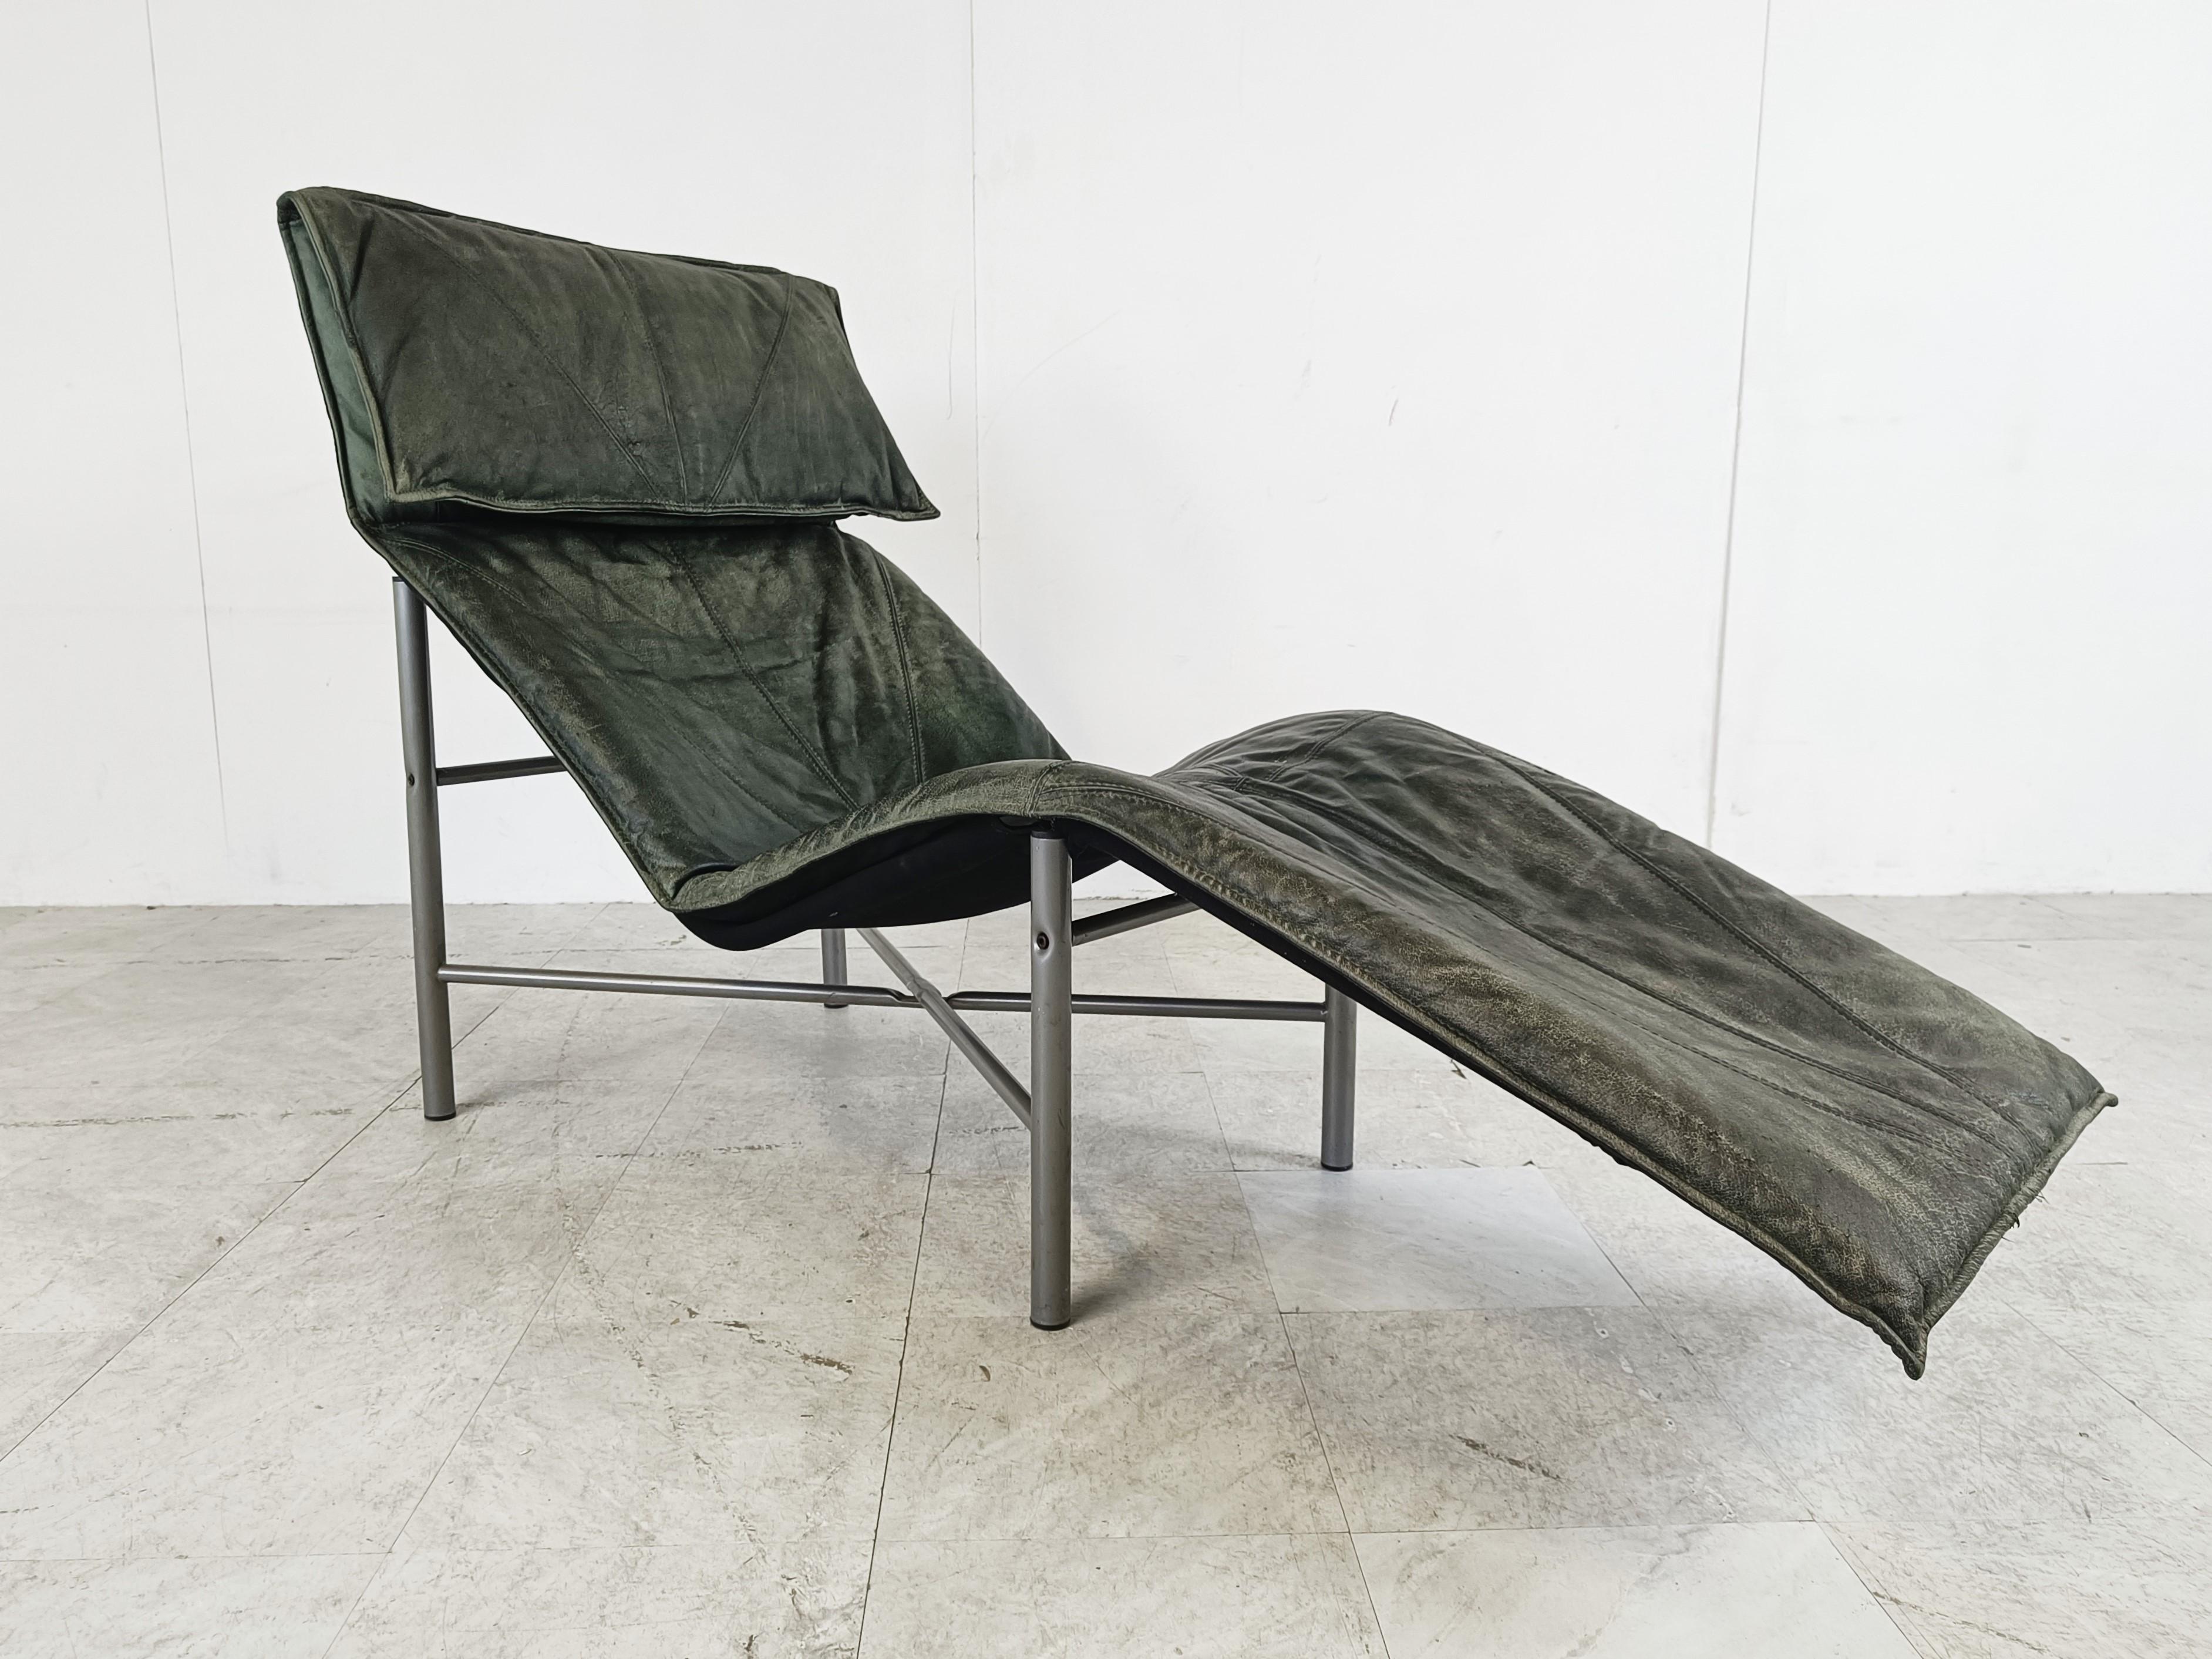 Vintage 'chaise longue' model 'skye' designed by Tord Björklund for Ikea in the 1980s.

The chair is amazingly comfortable and is in good condition.

Dark green leather

1980s - Sweden.

Dimensions:
Width 155 cm
Depth 69 cm
Height 96